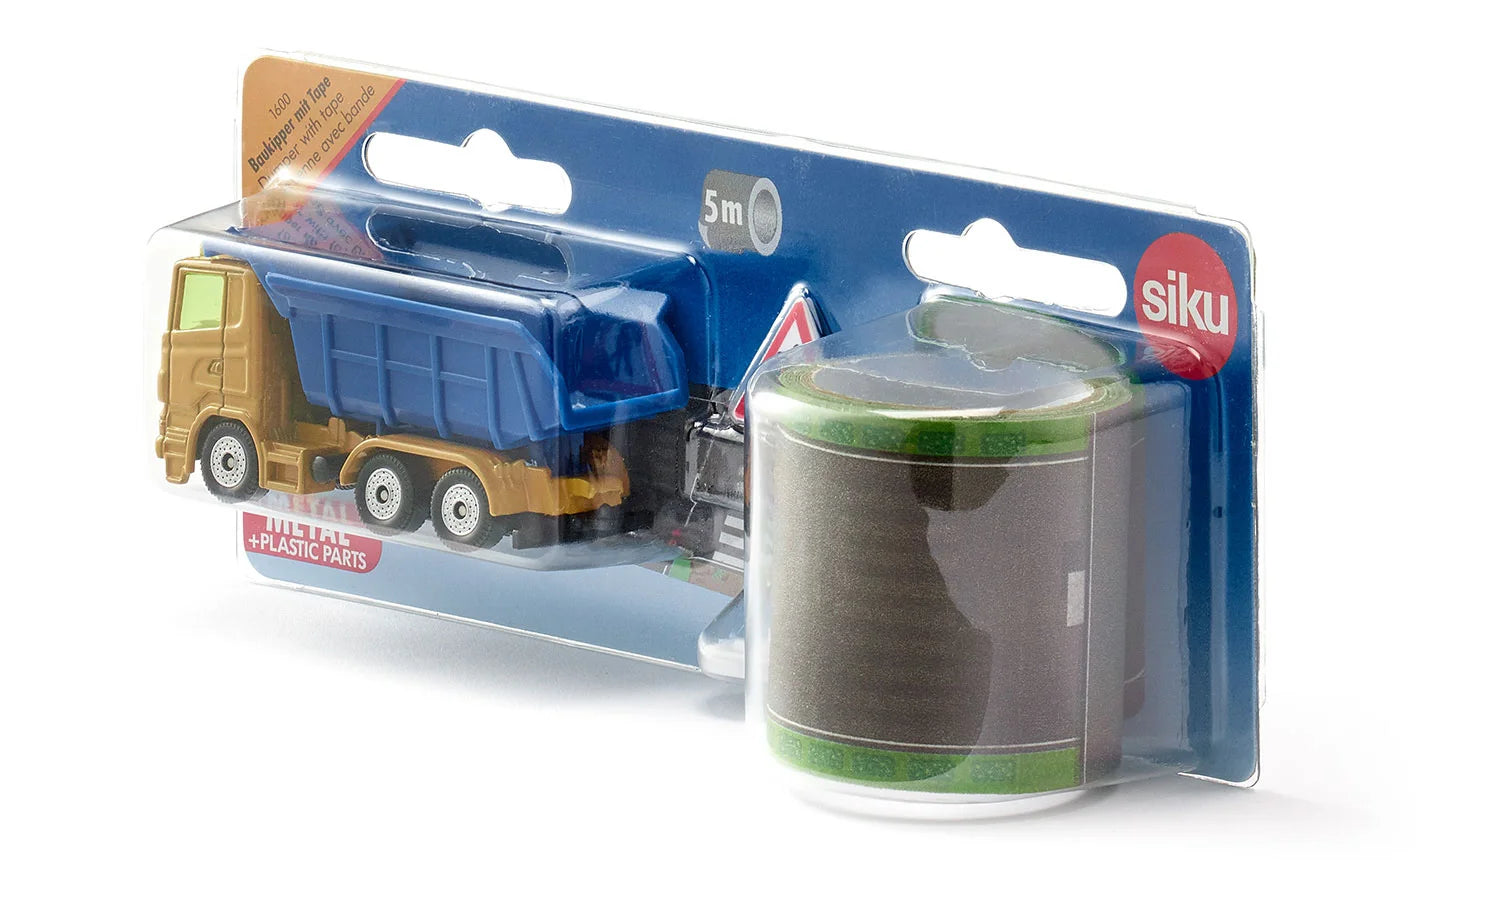 Siku 1:87 Construction Truck With Tape